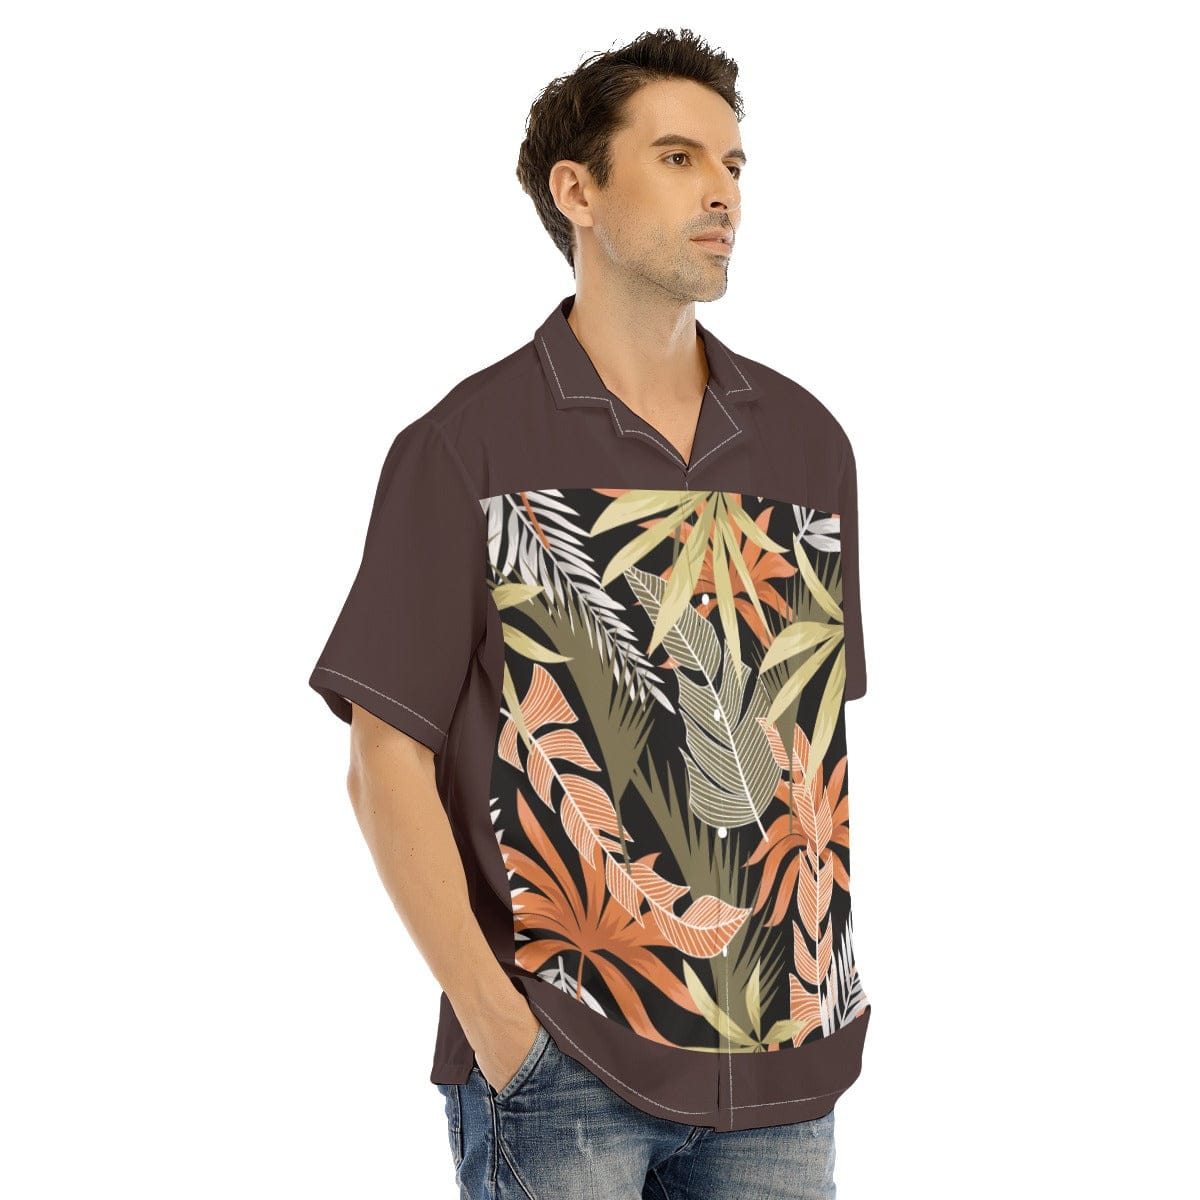 Yoycol All-Over Print Men's Hawaiian Shirt With Button Closure